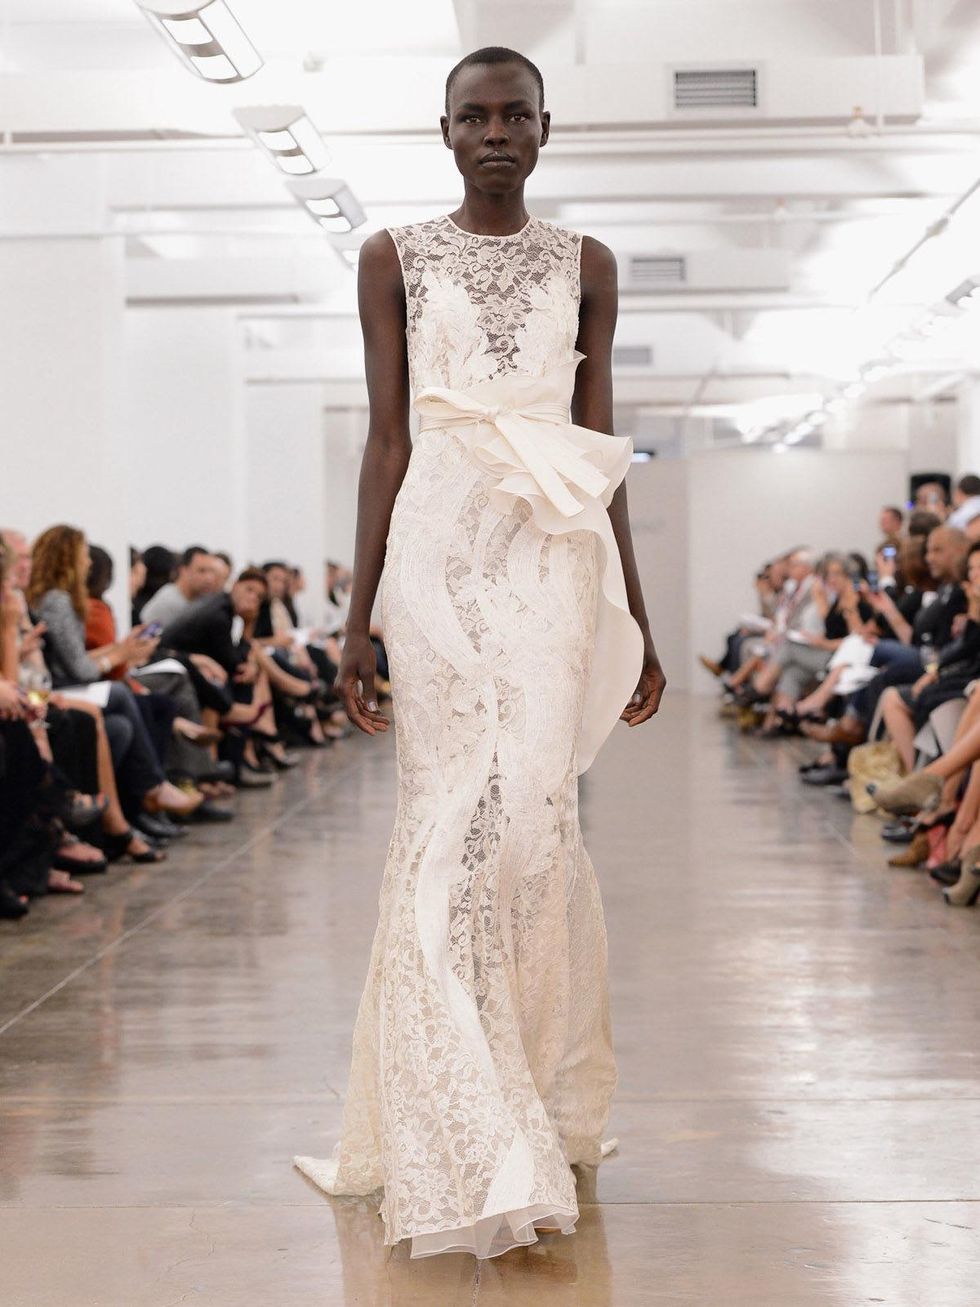 Clifford, Fashion Week spring 2013, Sunday, Sept. 9, 2012, Carmen Marc Valvo, white lace gown